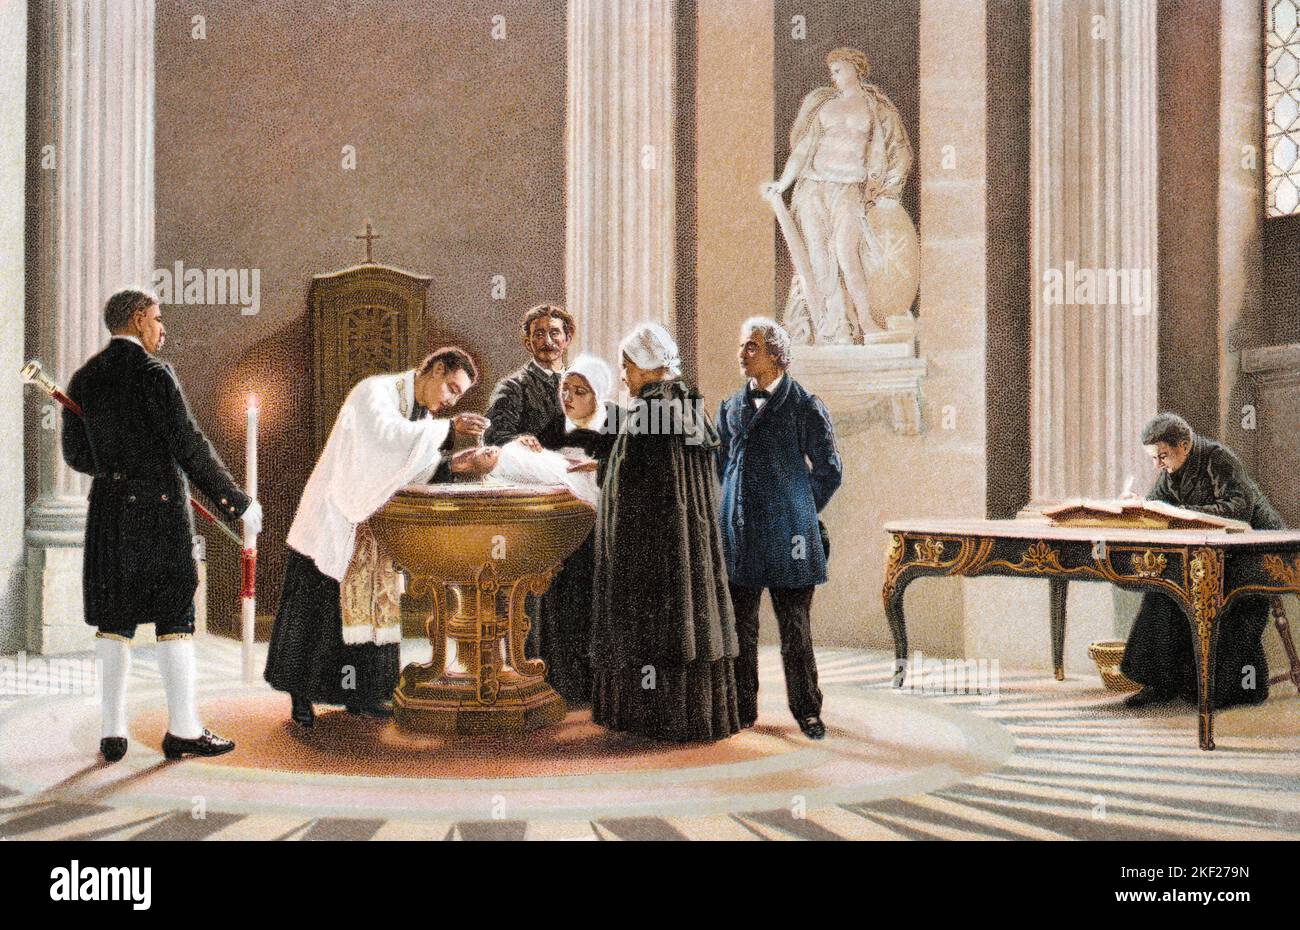 1880s BAPTISM TABLEAU IN A CATHOLIC CHURCH WITH PRIEST AND FAMILY AT BAPTISMAL FONT BY FRENCH ARTIST E. RENARD - ka9368 HAR001 HARS ARTIST SPIRITUALITY SENIOR MAN SENIOR ADULT EUROPE FATHERS MIDDLE-AGED MIDDLE-AGED MAN PRIEST MIDDLE-AGED WOMAN EUROPEAN GLOBAL PROTECTION RELIGIOUS AND DADS CONNECTION CONCEPTUAL 1880s DERIVATIVE ECONOMIC POSTCARD RITE SUPPORT E. FAITHFUL BAPTISM FAITH FONT GROWTH JUVENILES MID-ADULT MID-ADULT MAN MID-ADULT WOMAN MOMS RECESSION TOGETHERNESS UNEMPLOYMENT WORLDWIDE YOUNG ADULT MAN YOUNG ADULT WOMAN BELIEF CATHOLIC CAUCASIAN ETHNICITY DOWNTURN HAR001 OLD FASHIONED Stock Photo